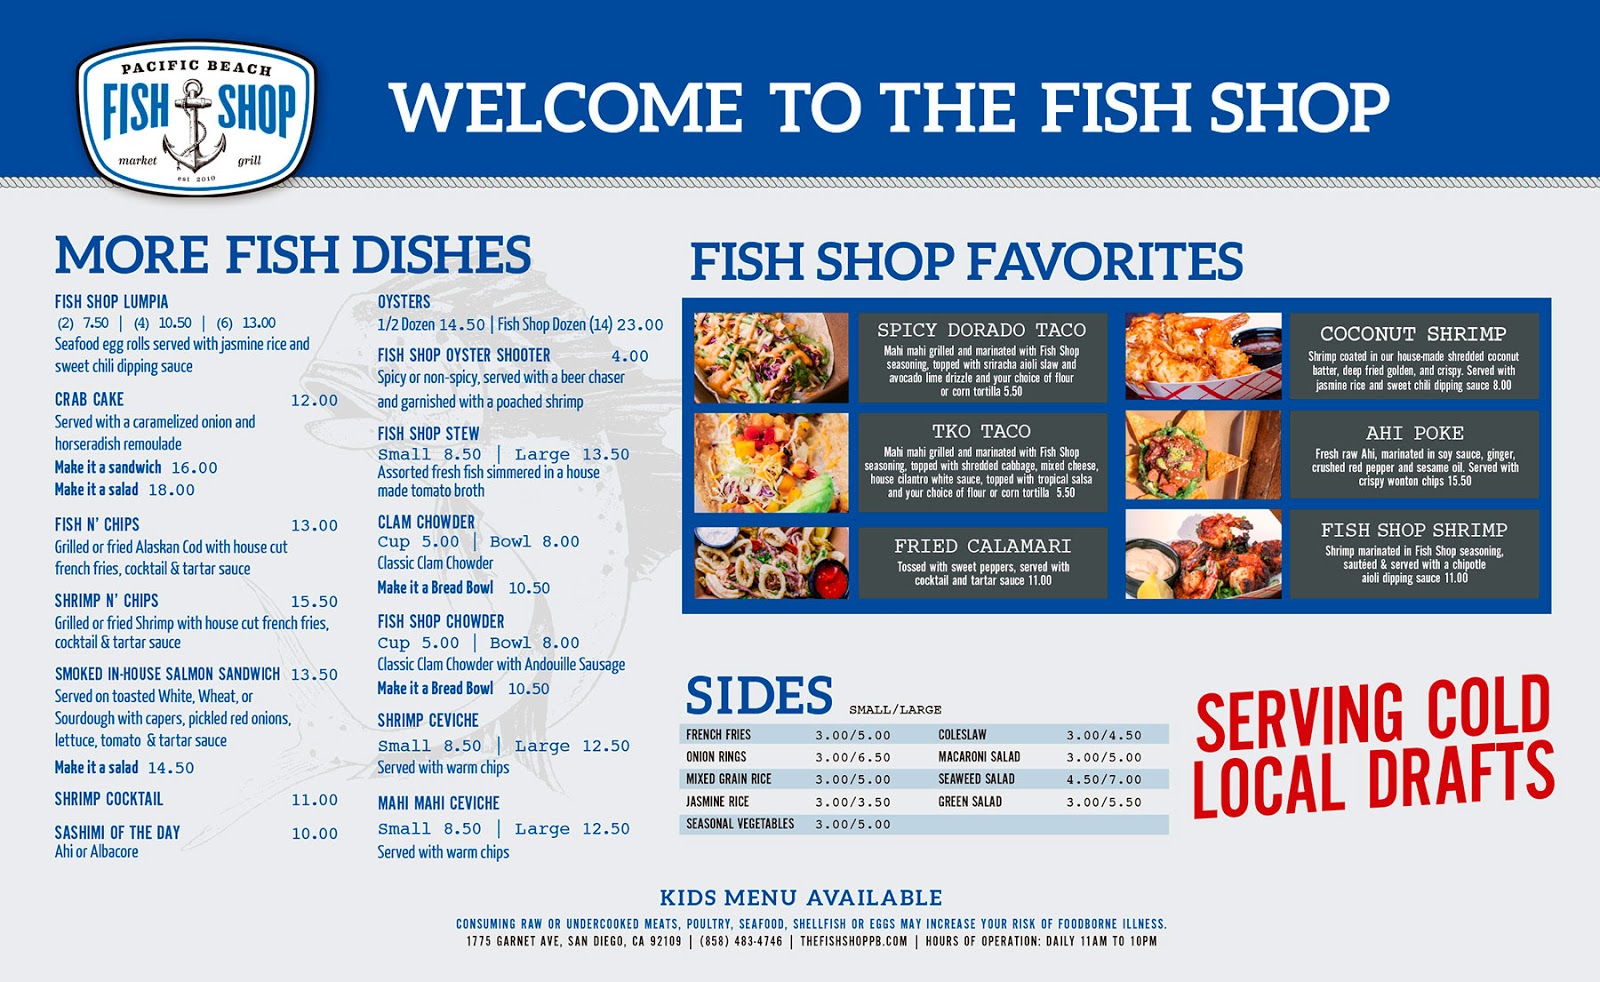 The team behind Pacific Beach Fish Shop thinks that they can compete with t...